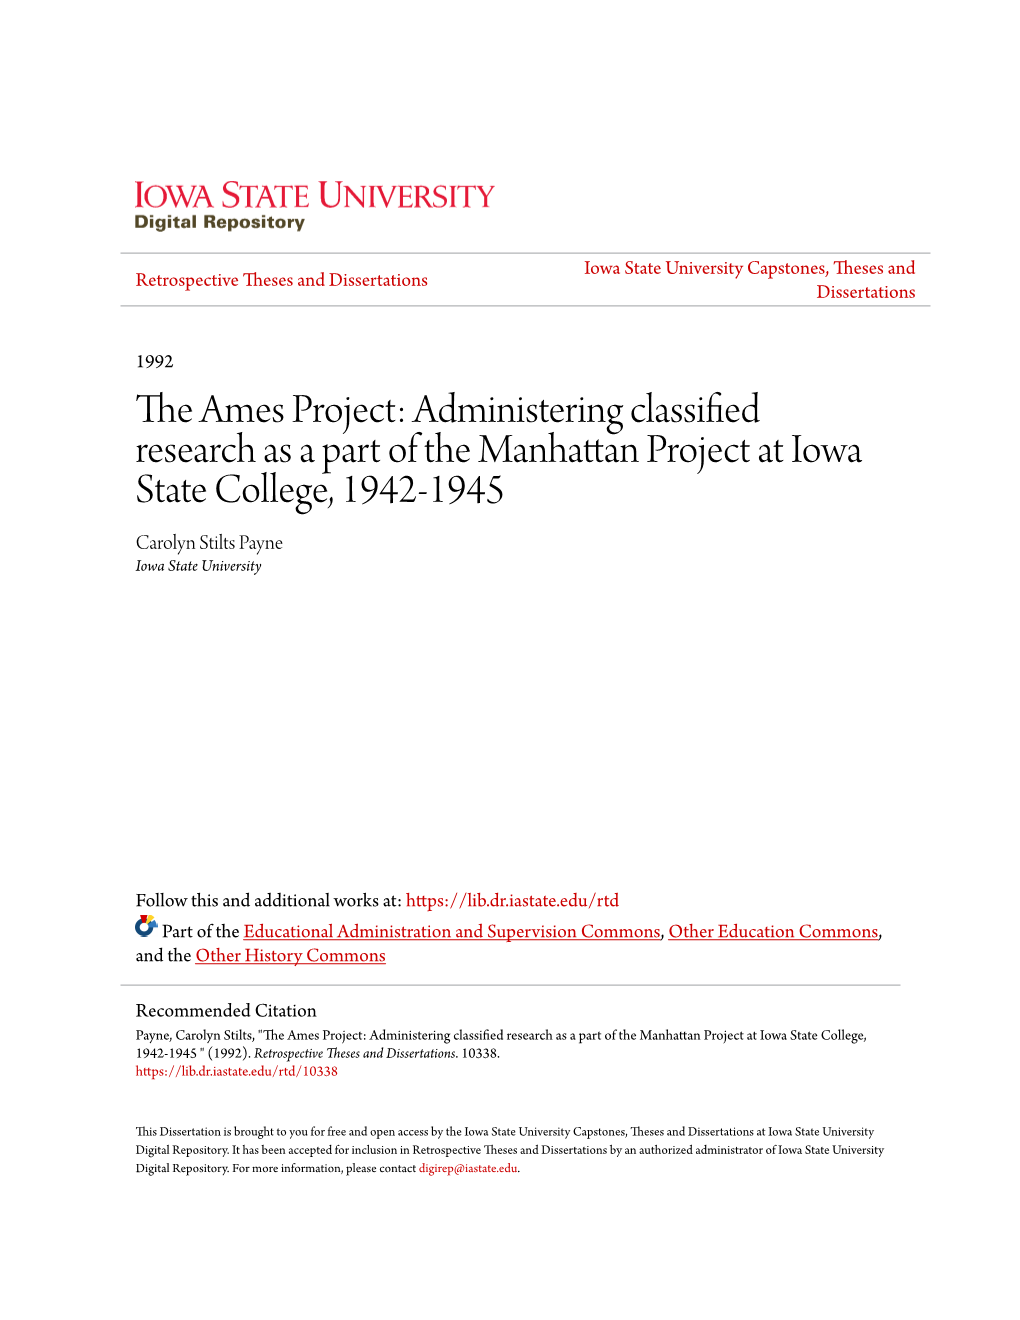 Administering Classified Research As a Part of the Manhattan Project at Iowa State College, 1942-1945 Carolyn Stilts Payne Iowa State University